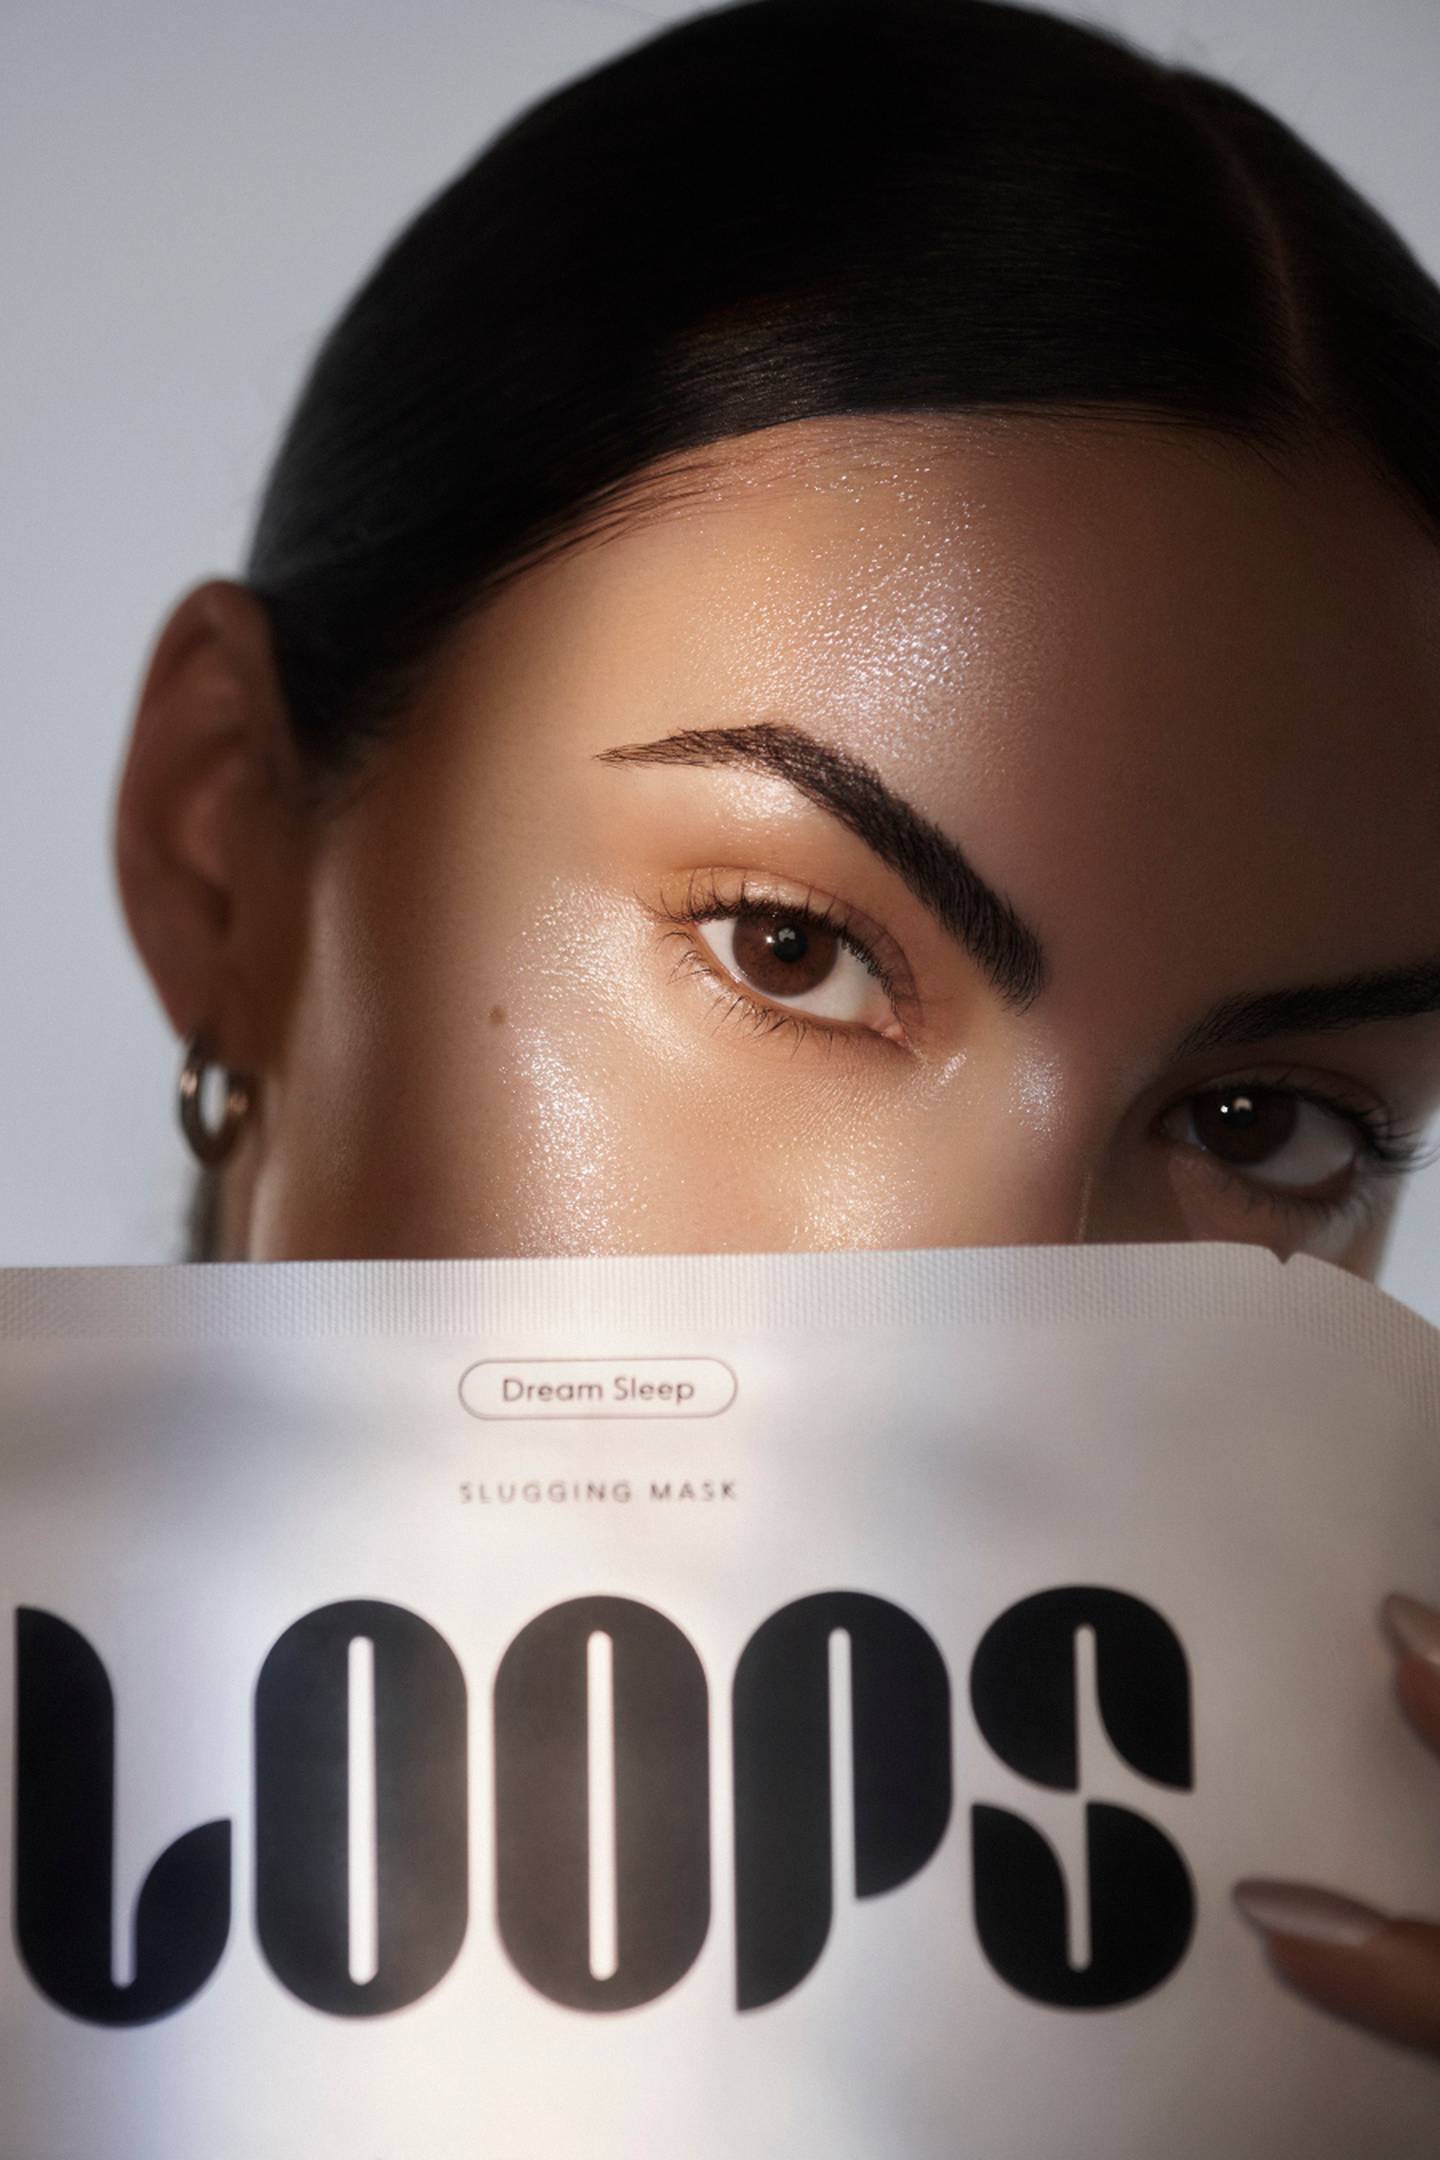 Camila Mendes in an ad for beauty brand Loops Beauty